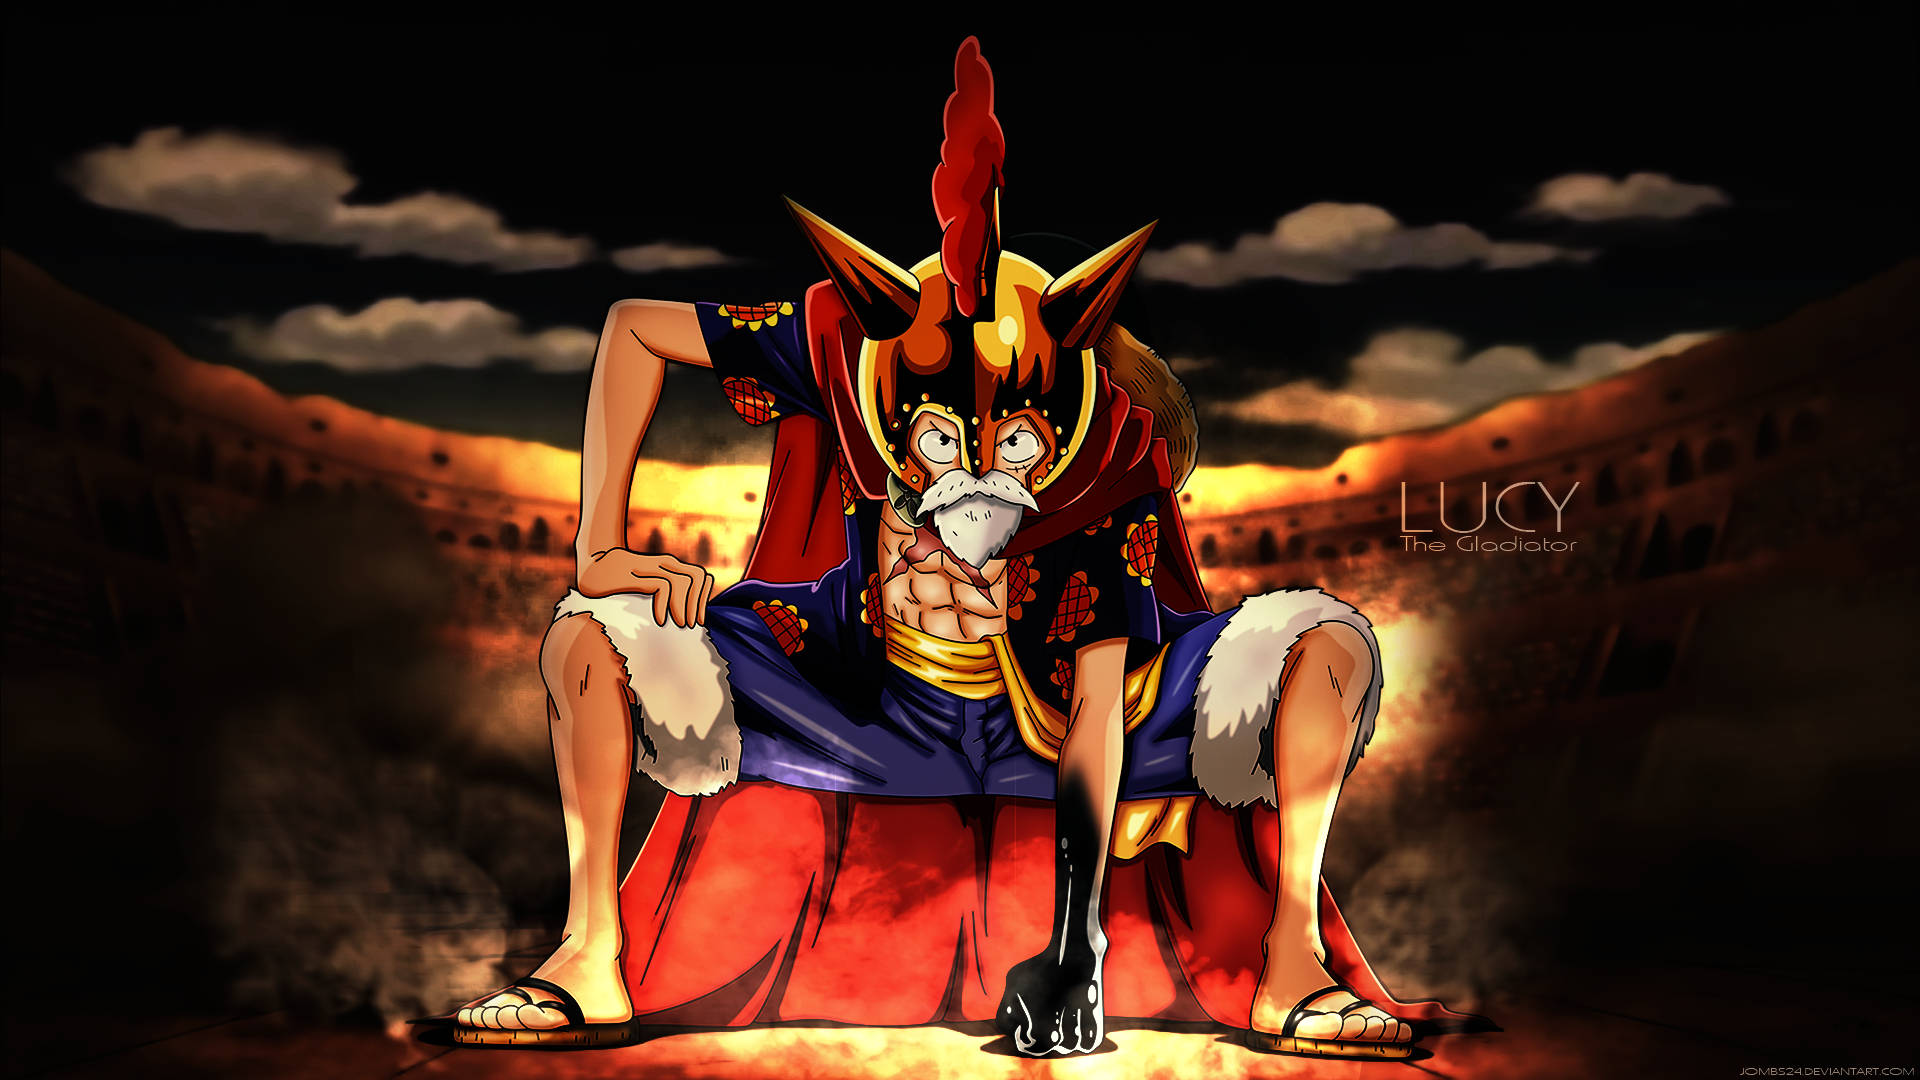 Luffy Pirate Monster Creature